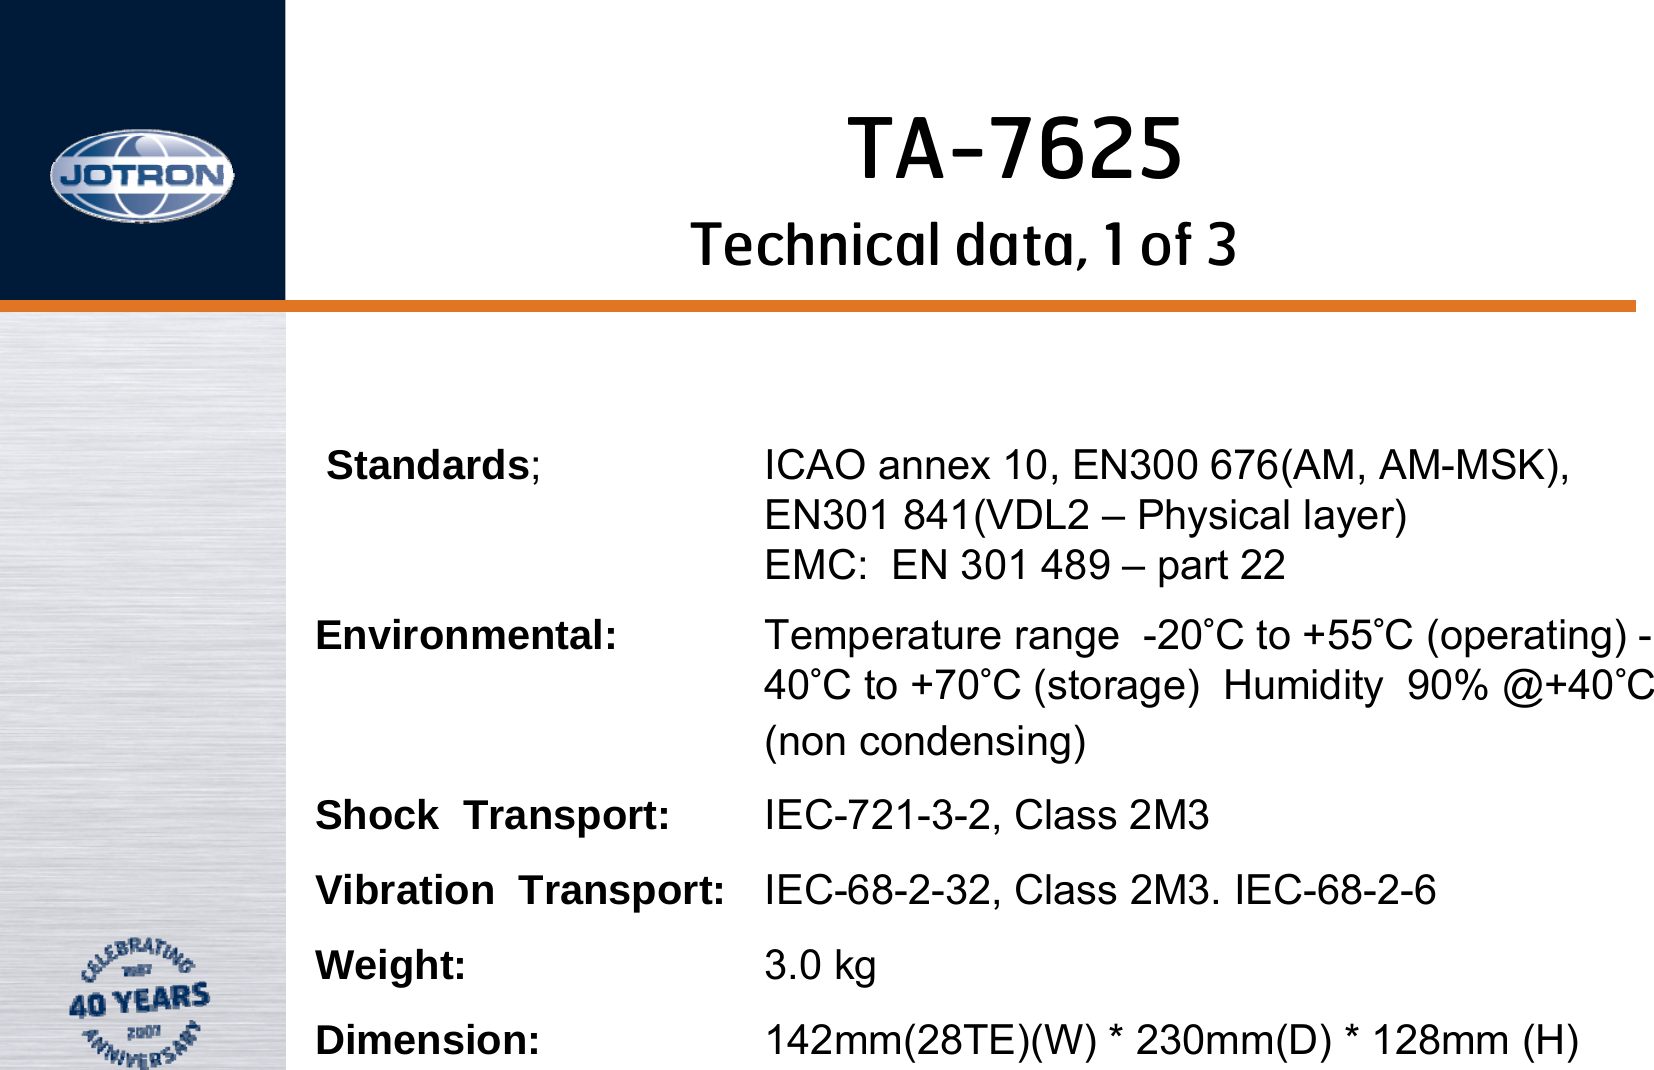 Technical data, 1 of 3Standards; ICAO annex 10, EN300 676(AM, AM-MSK),                EN301 841(VDL2 – Physical layer)                  EMC:  EN 301 489 – part 22Environmental: Temperature range  -20°C to +55°C (operating) -40°C to +70°C (storage)  Humidity  90% @+40°C (non condensing)Shock  Transport: IEC-721-3-2, Class 2M3  Vibration  Transport: IEC-68-2-32, Class 2M3. IEC-68-2-6Weight: 3.0 kgDimension: 142mm(28TE)(W) * 230mm(D) * 128mm (H) TA-7625